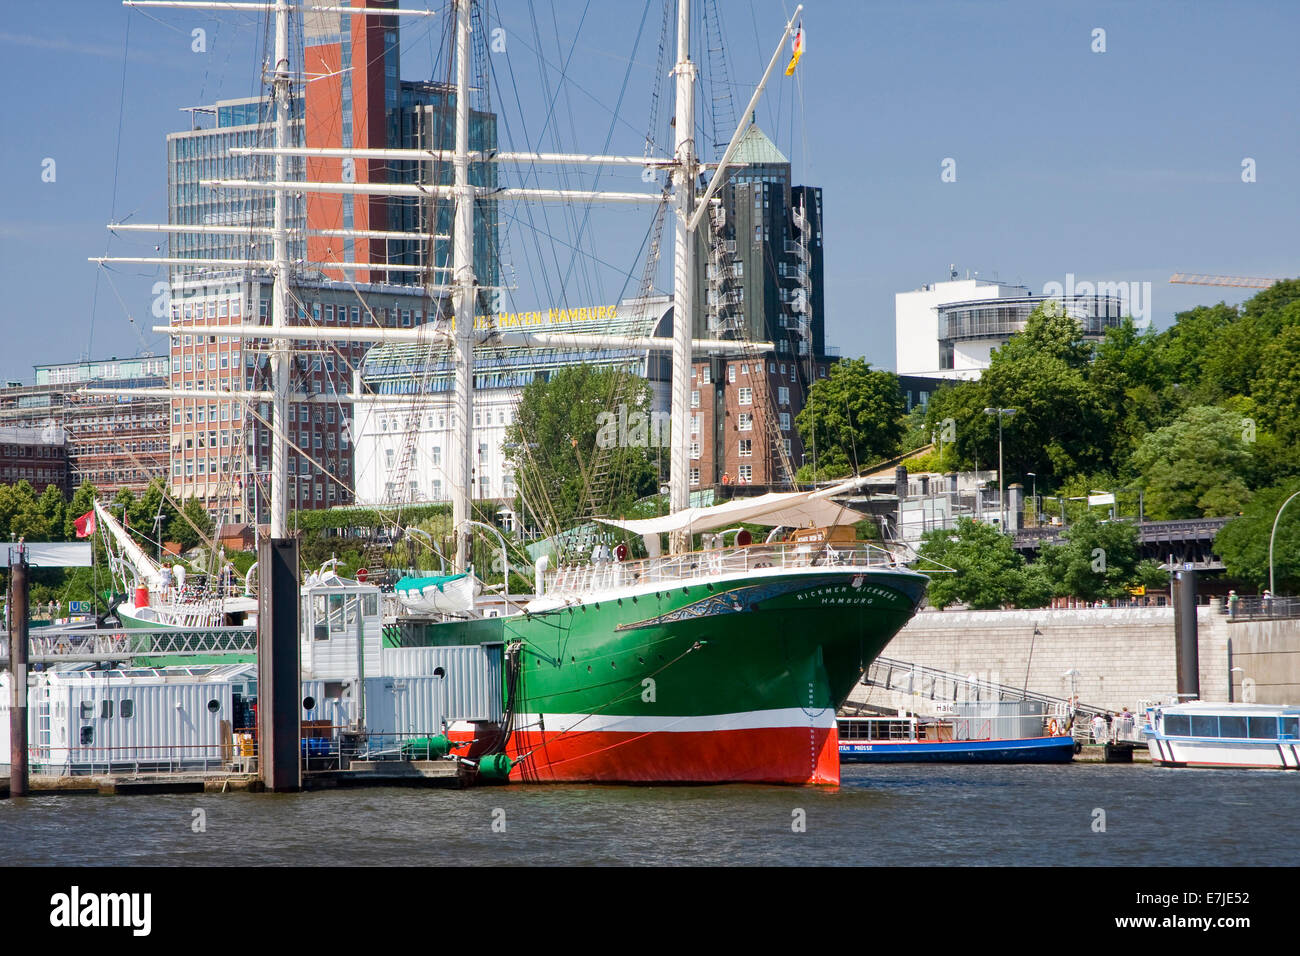 Architecture, outside, boat, boats, FRG, federal republic, German, Germany, European, water, harbour, port, Hamburg, Hanseatic t Stock Photo